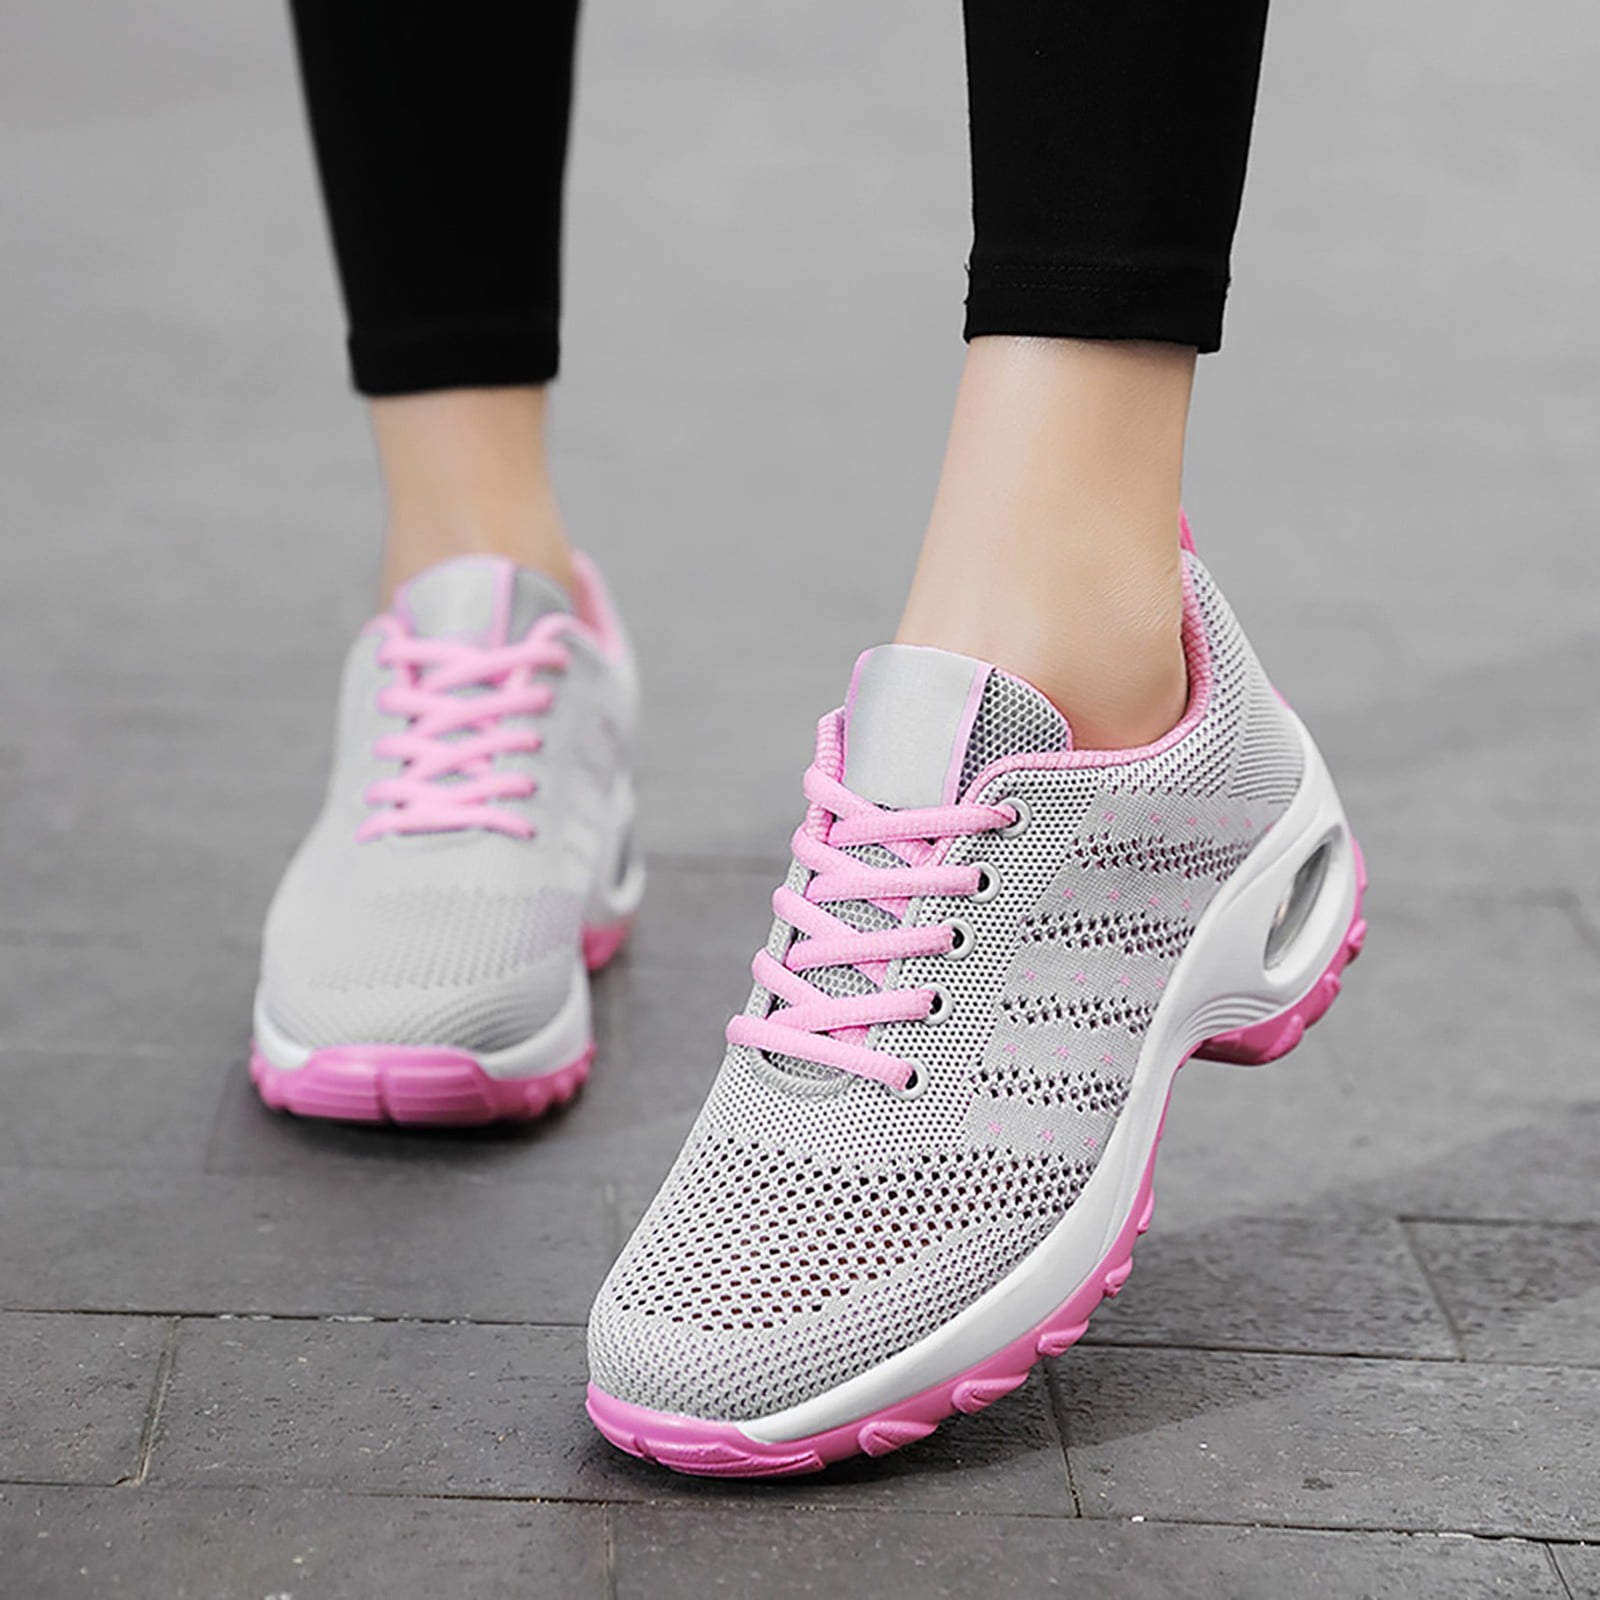 Share more than 250 nice ladies sneakers